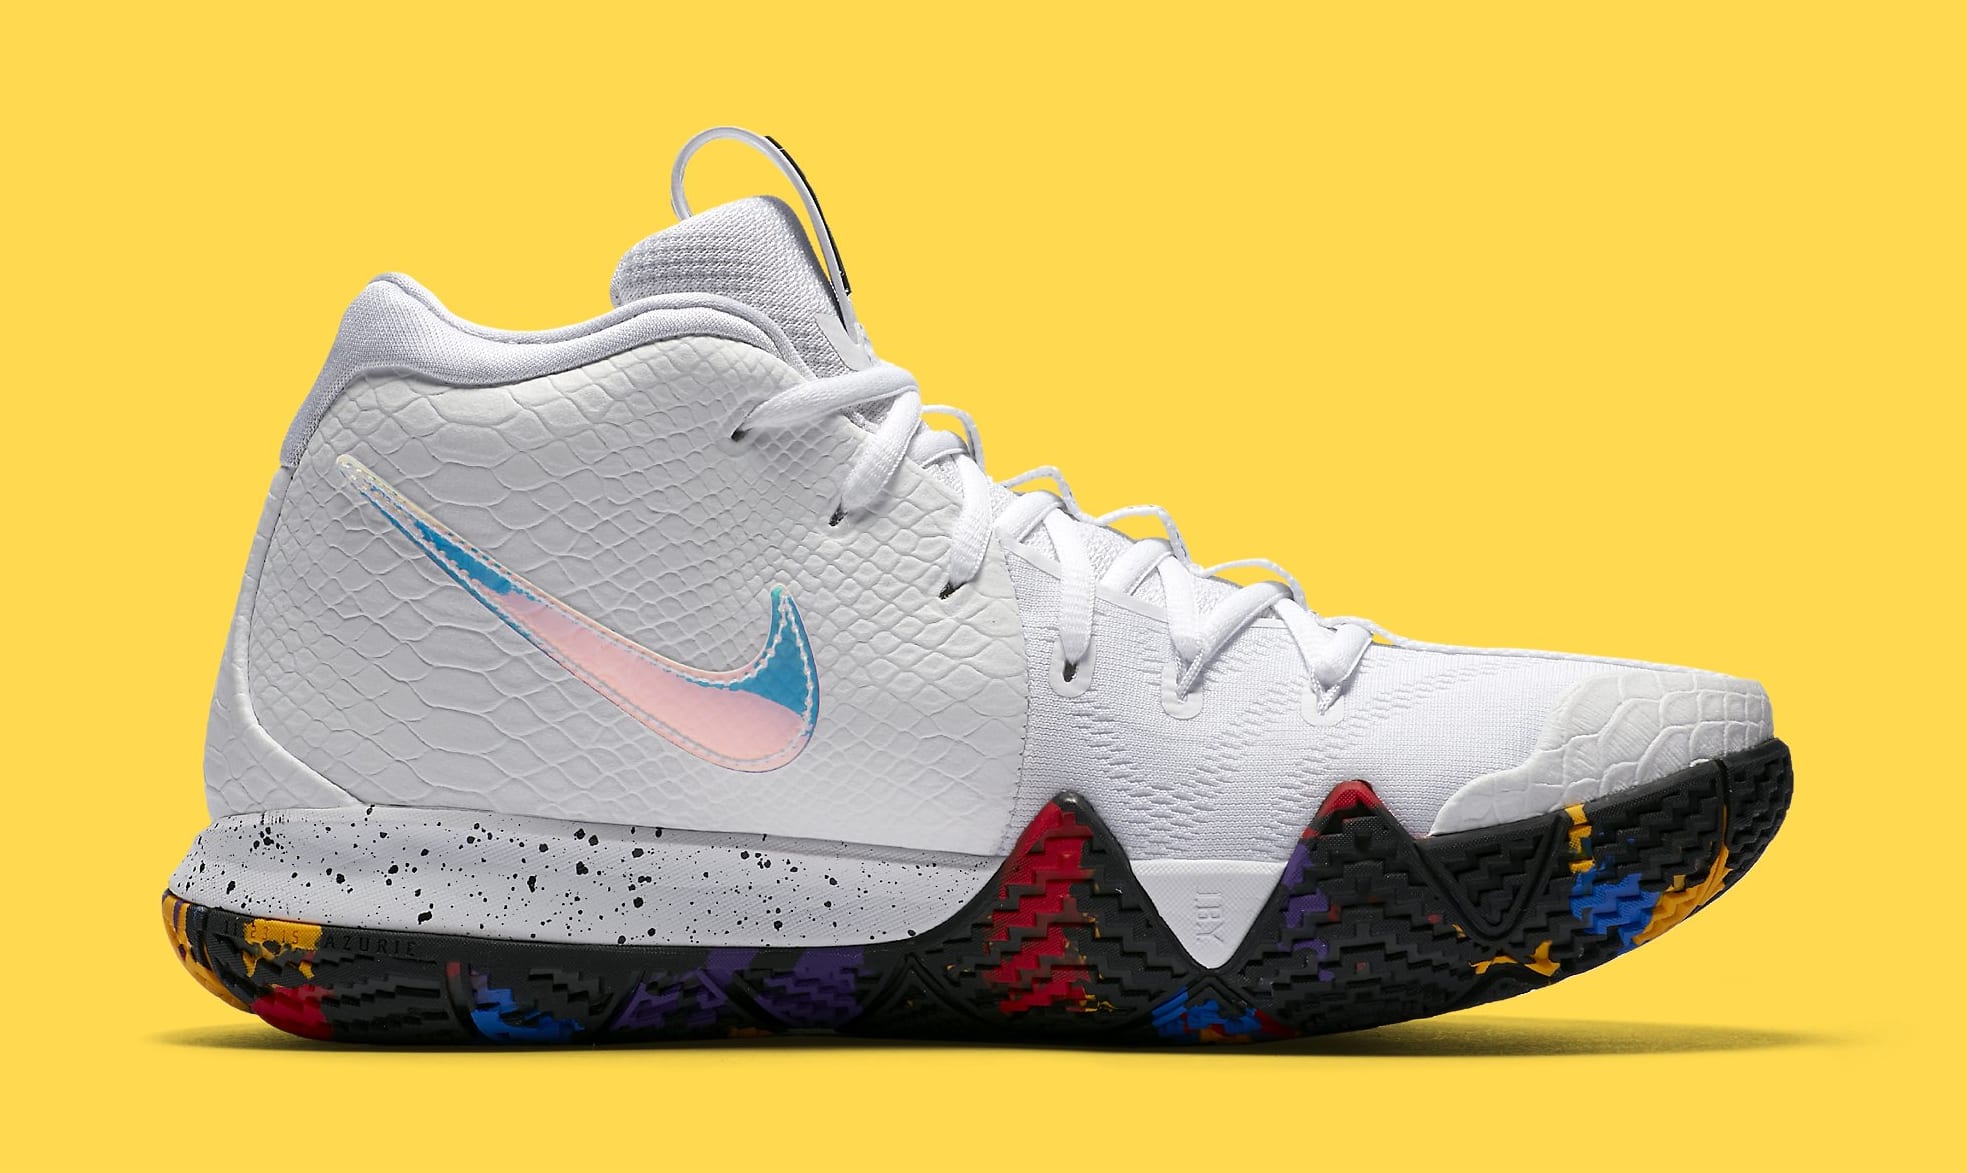 Nike Kyrie 4 &#x27;March Madness&#x27; 943804-104 (Medial)